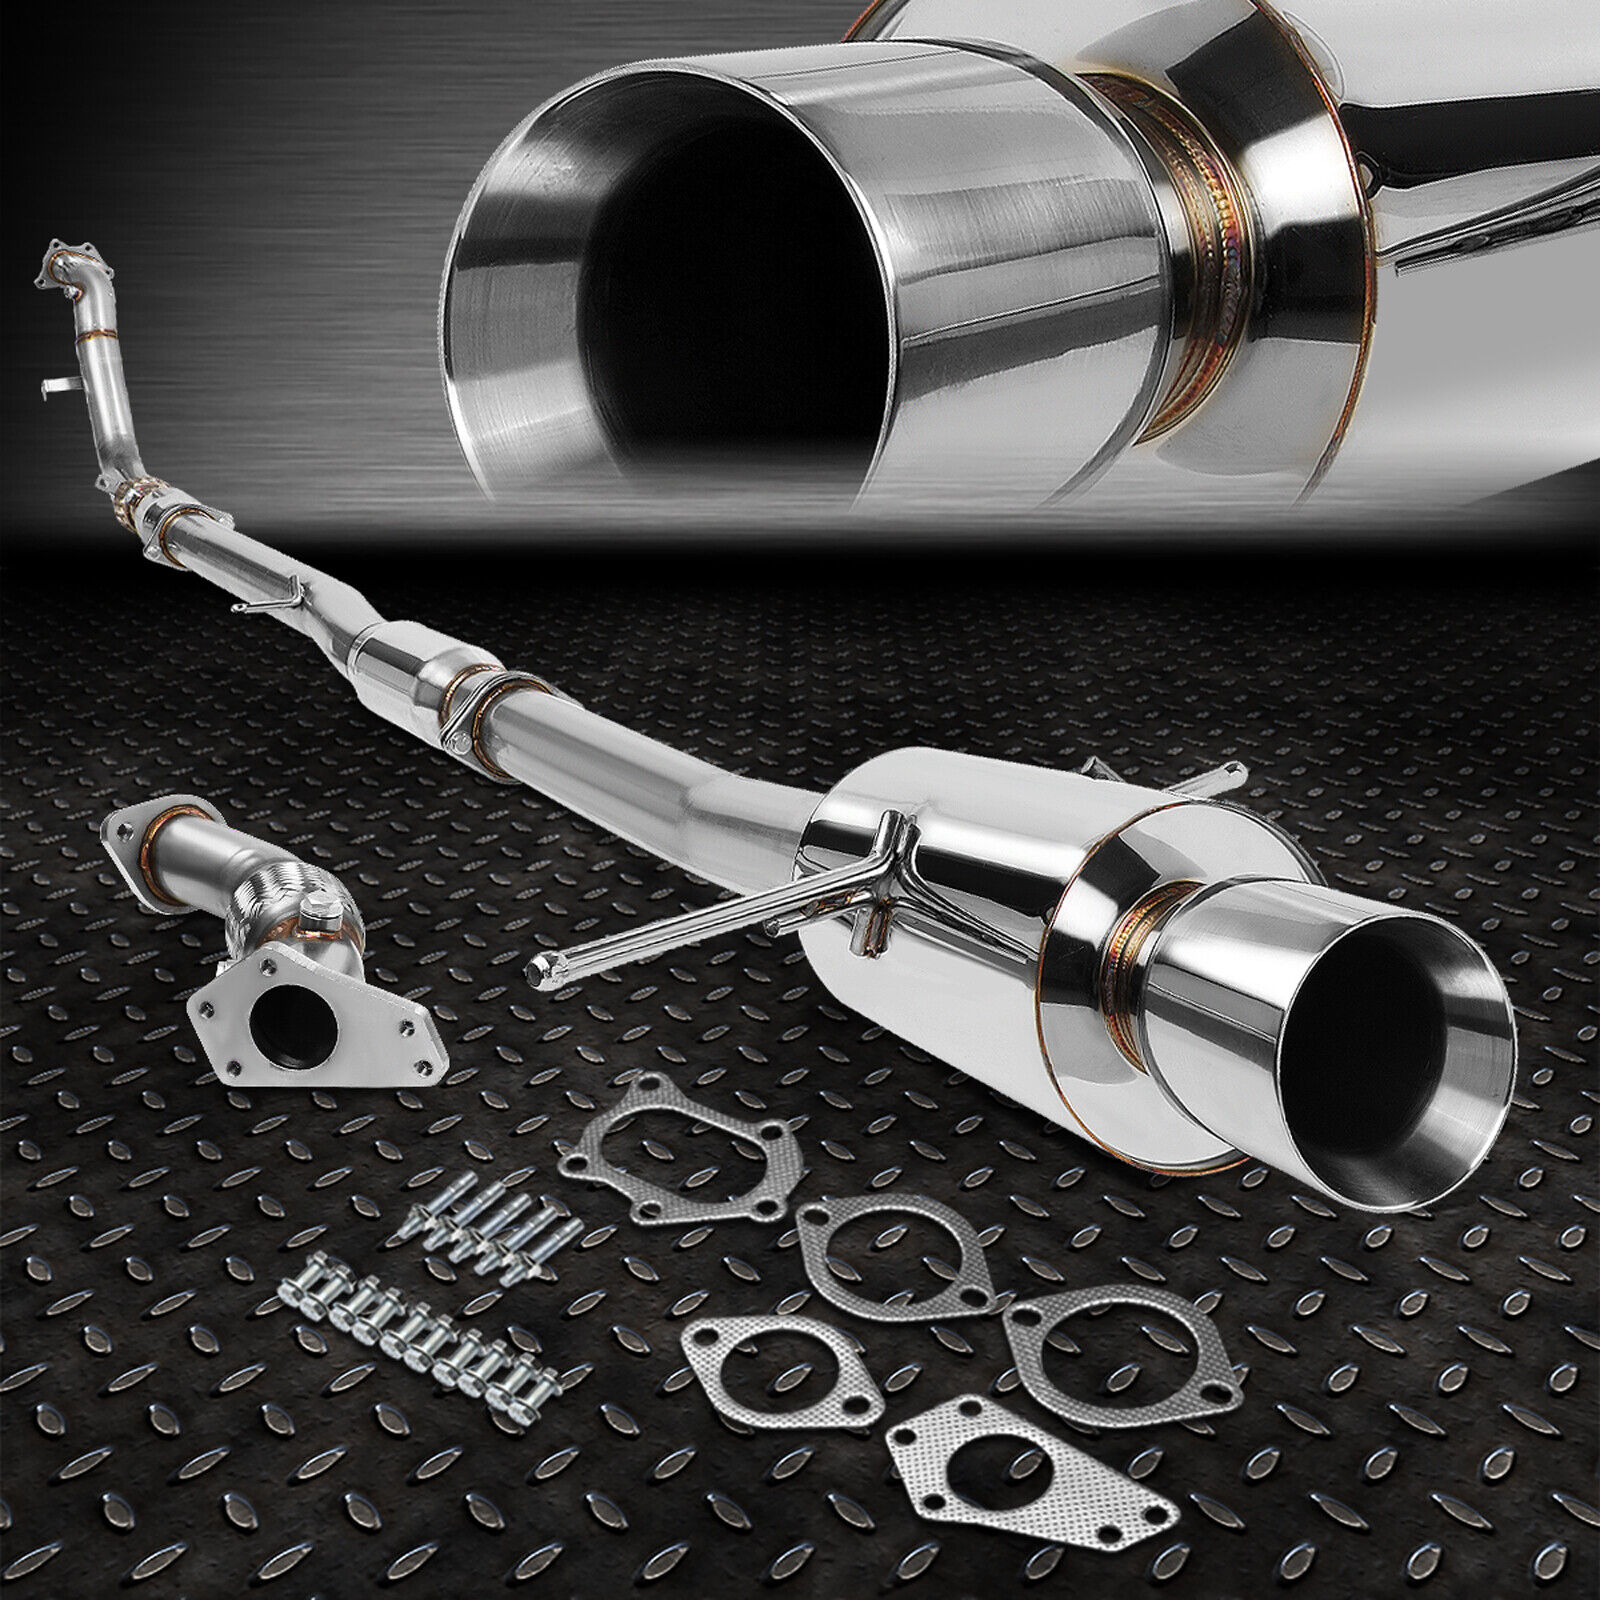 FOR 02-07 WRX/STi GD/GG BOLT-ON TURBO CATBACK+UP+DOWN PIPE EXHAUST 4\